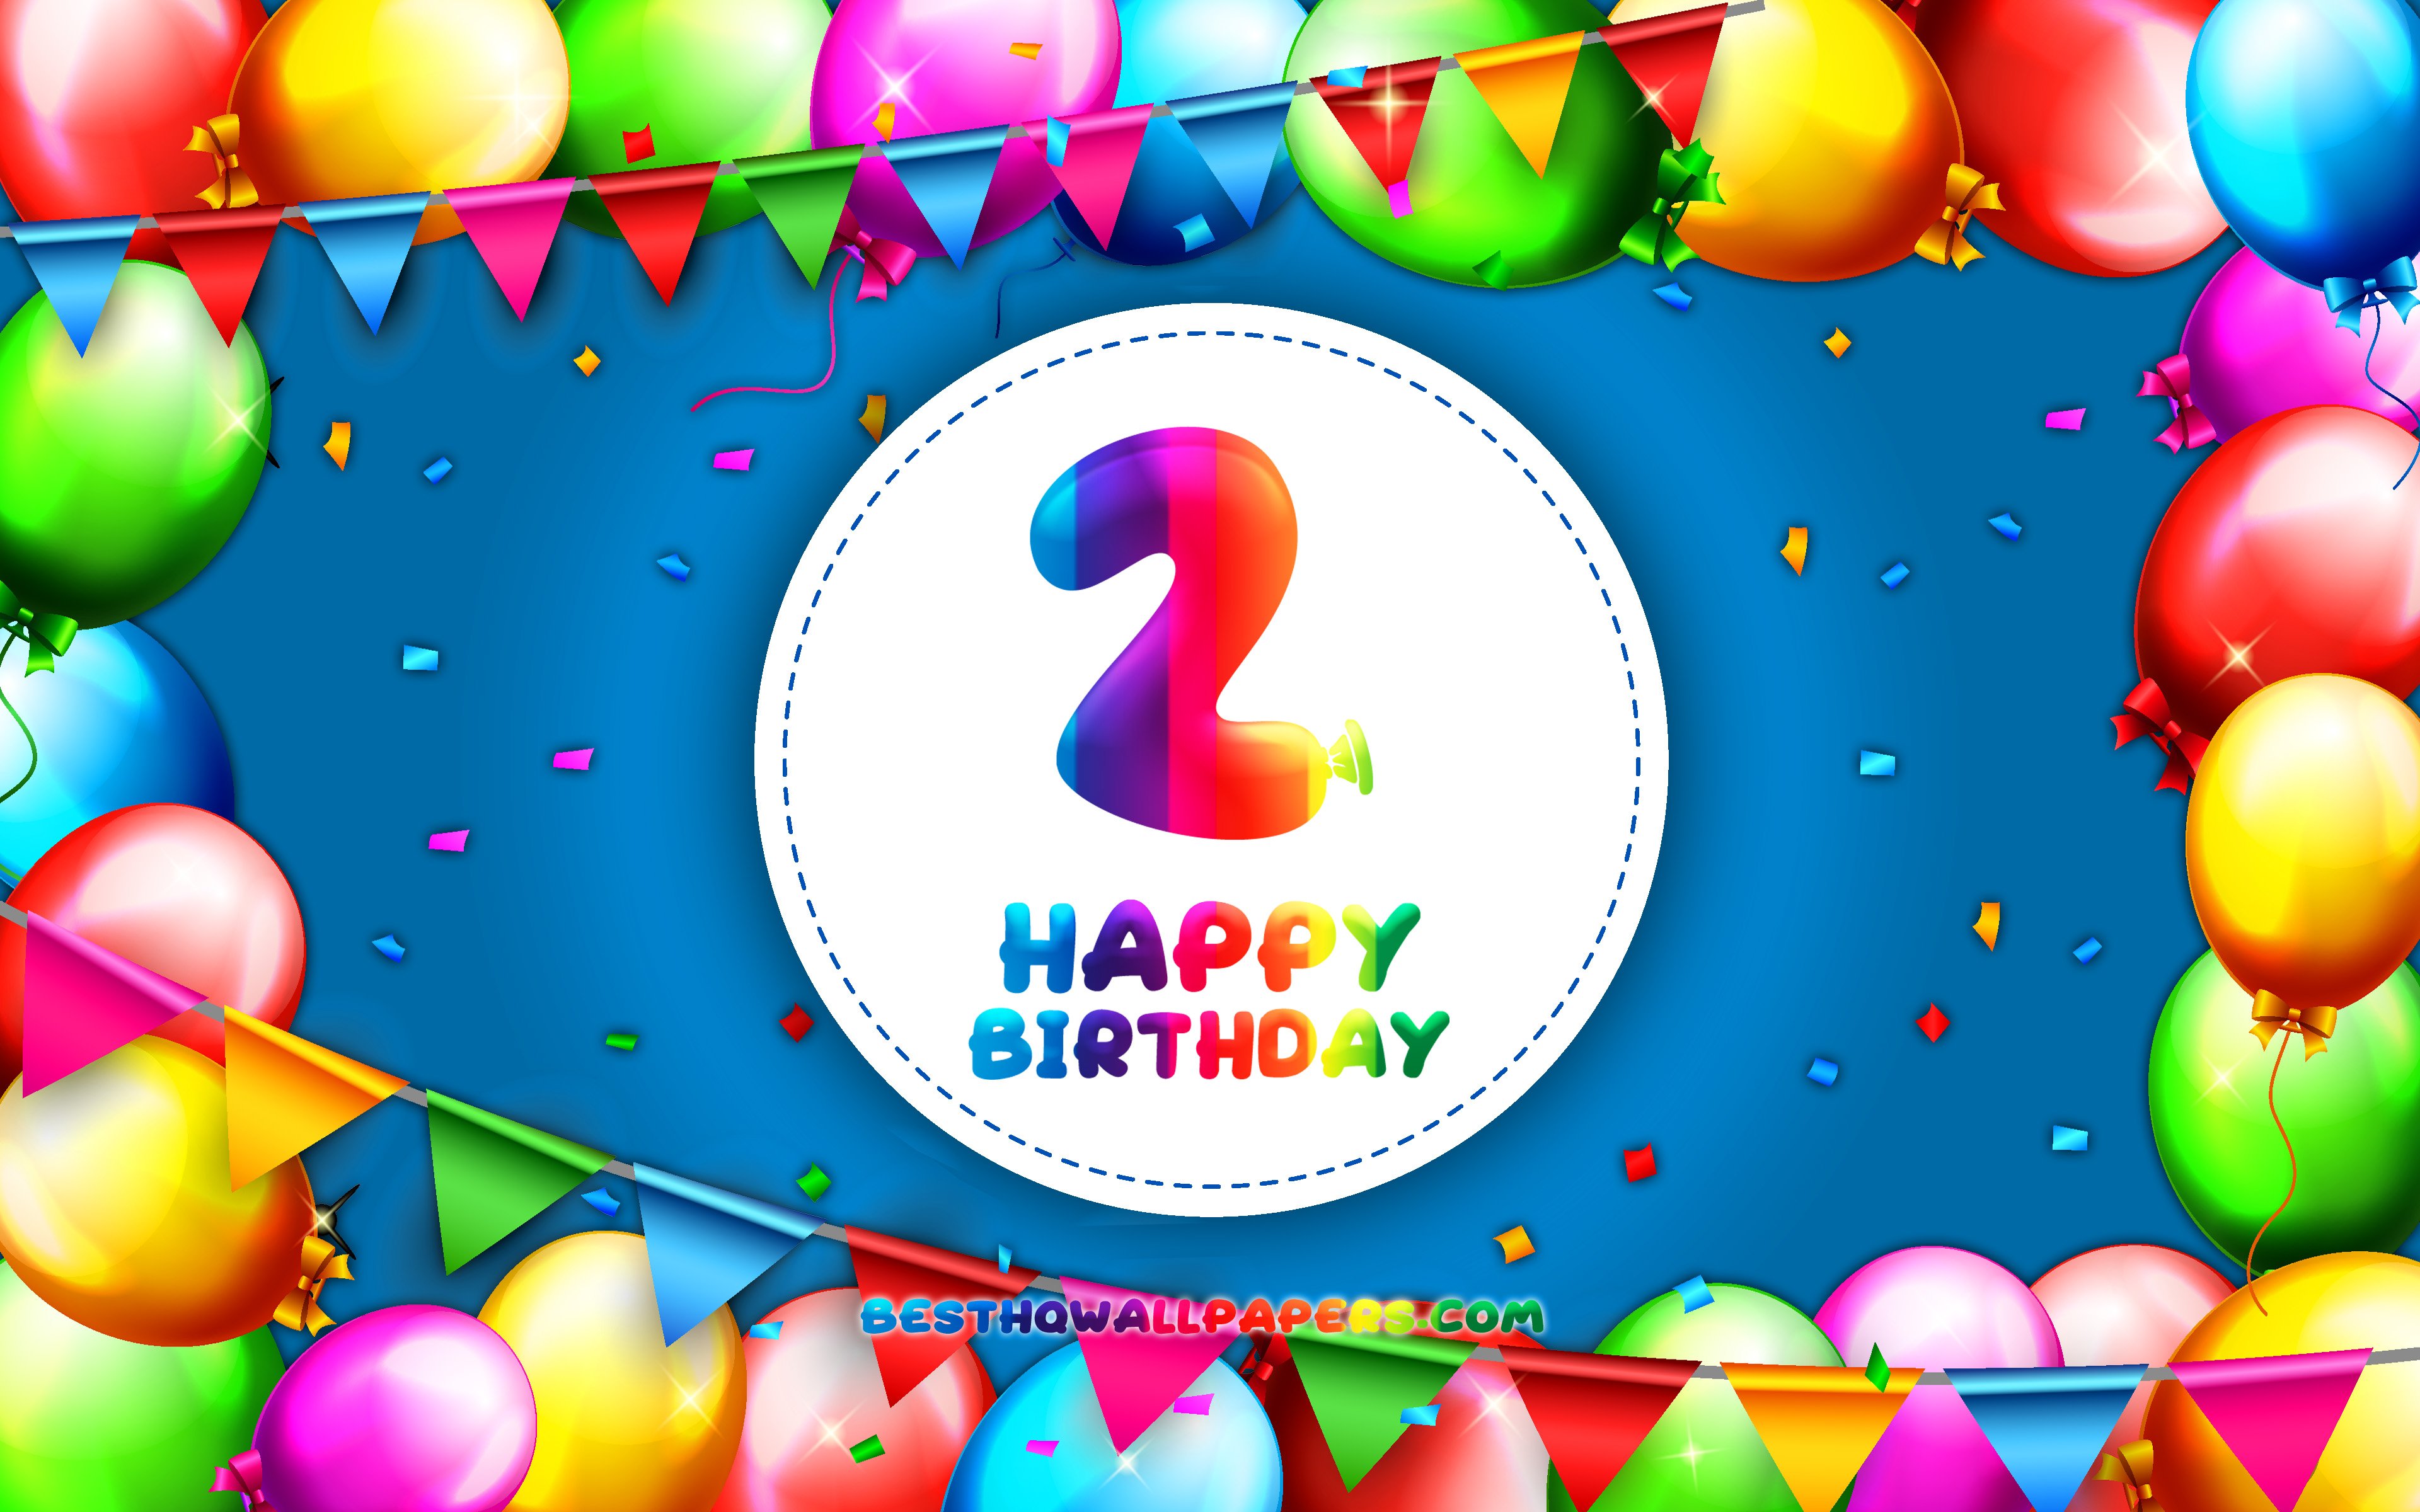 Download wallpapers Happy 2nd birthday, 4k, colorful balloon frame, Birthday  Party, purple background, Happy 2 Years Birthday, creative, 2nd Birthday,  Birthday concept, 2nd Birthday Party for desktop with resolution 3840x2400.  High Quality